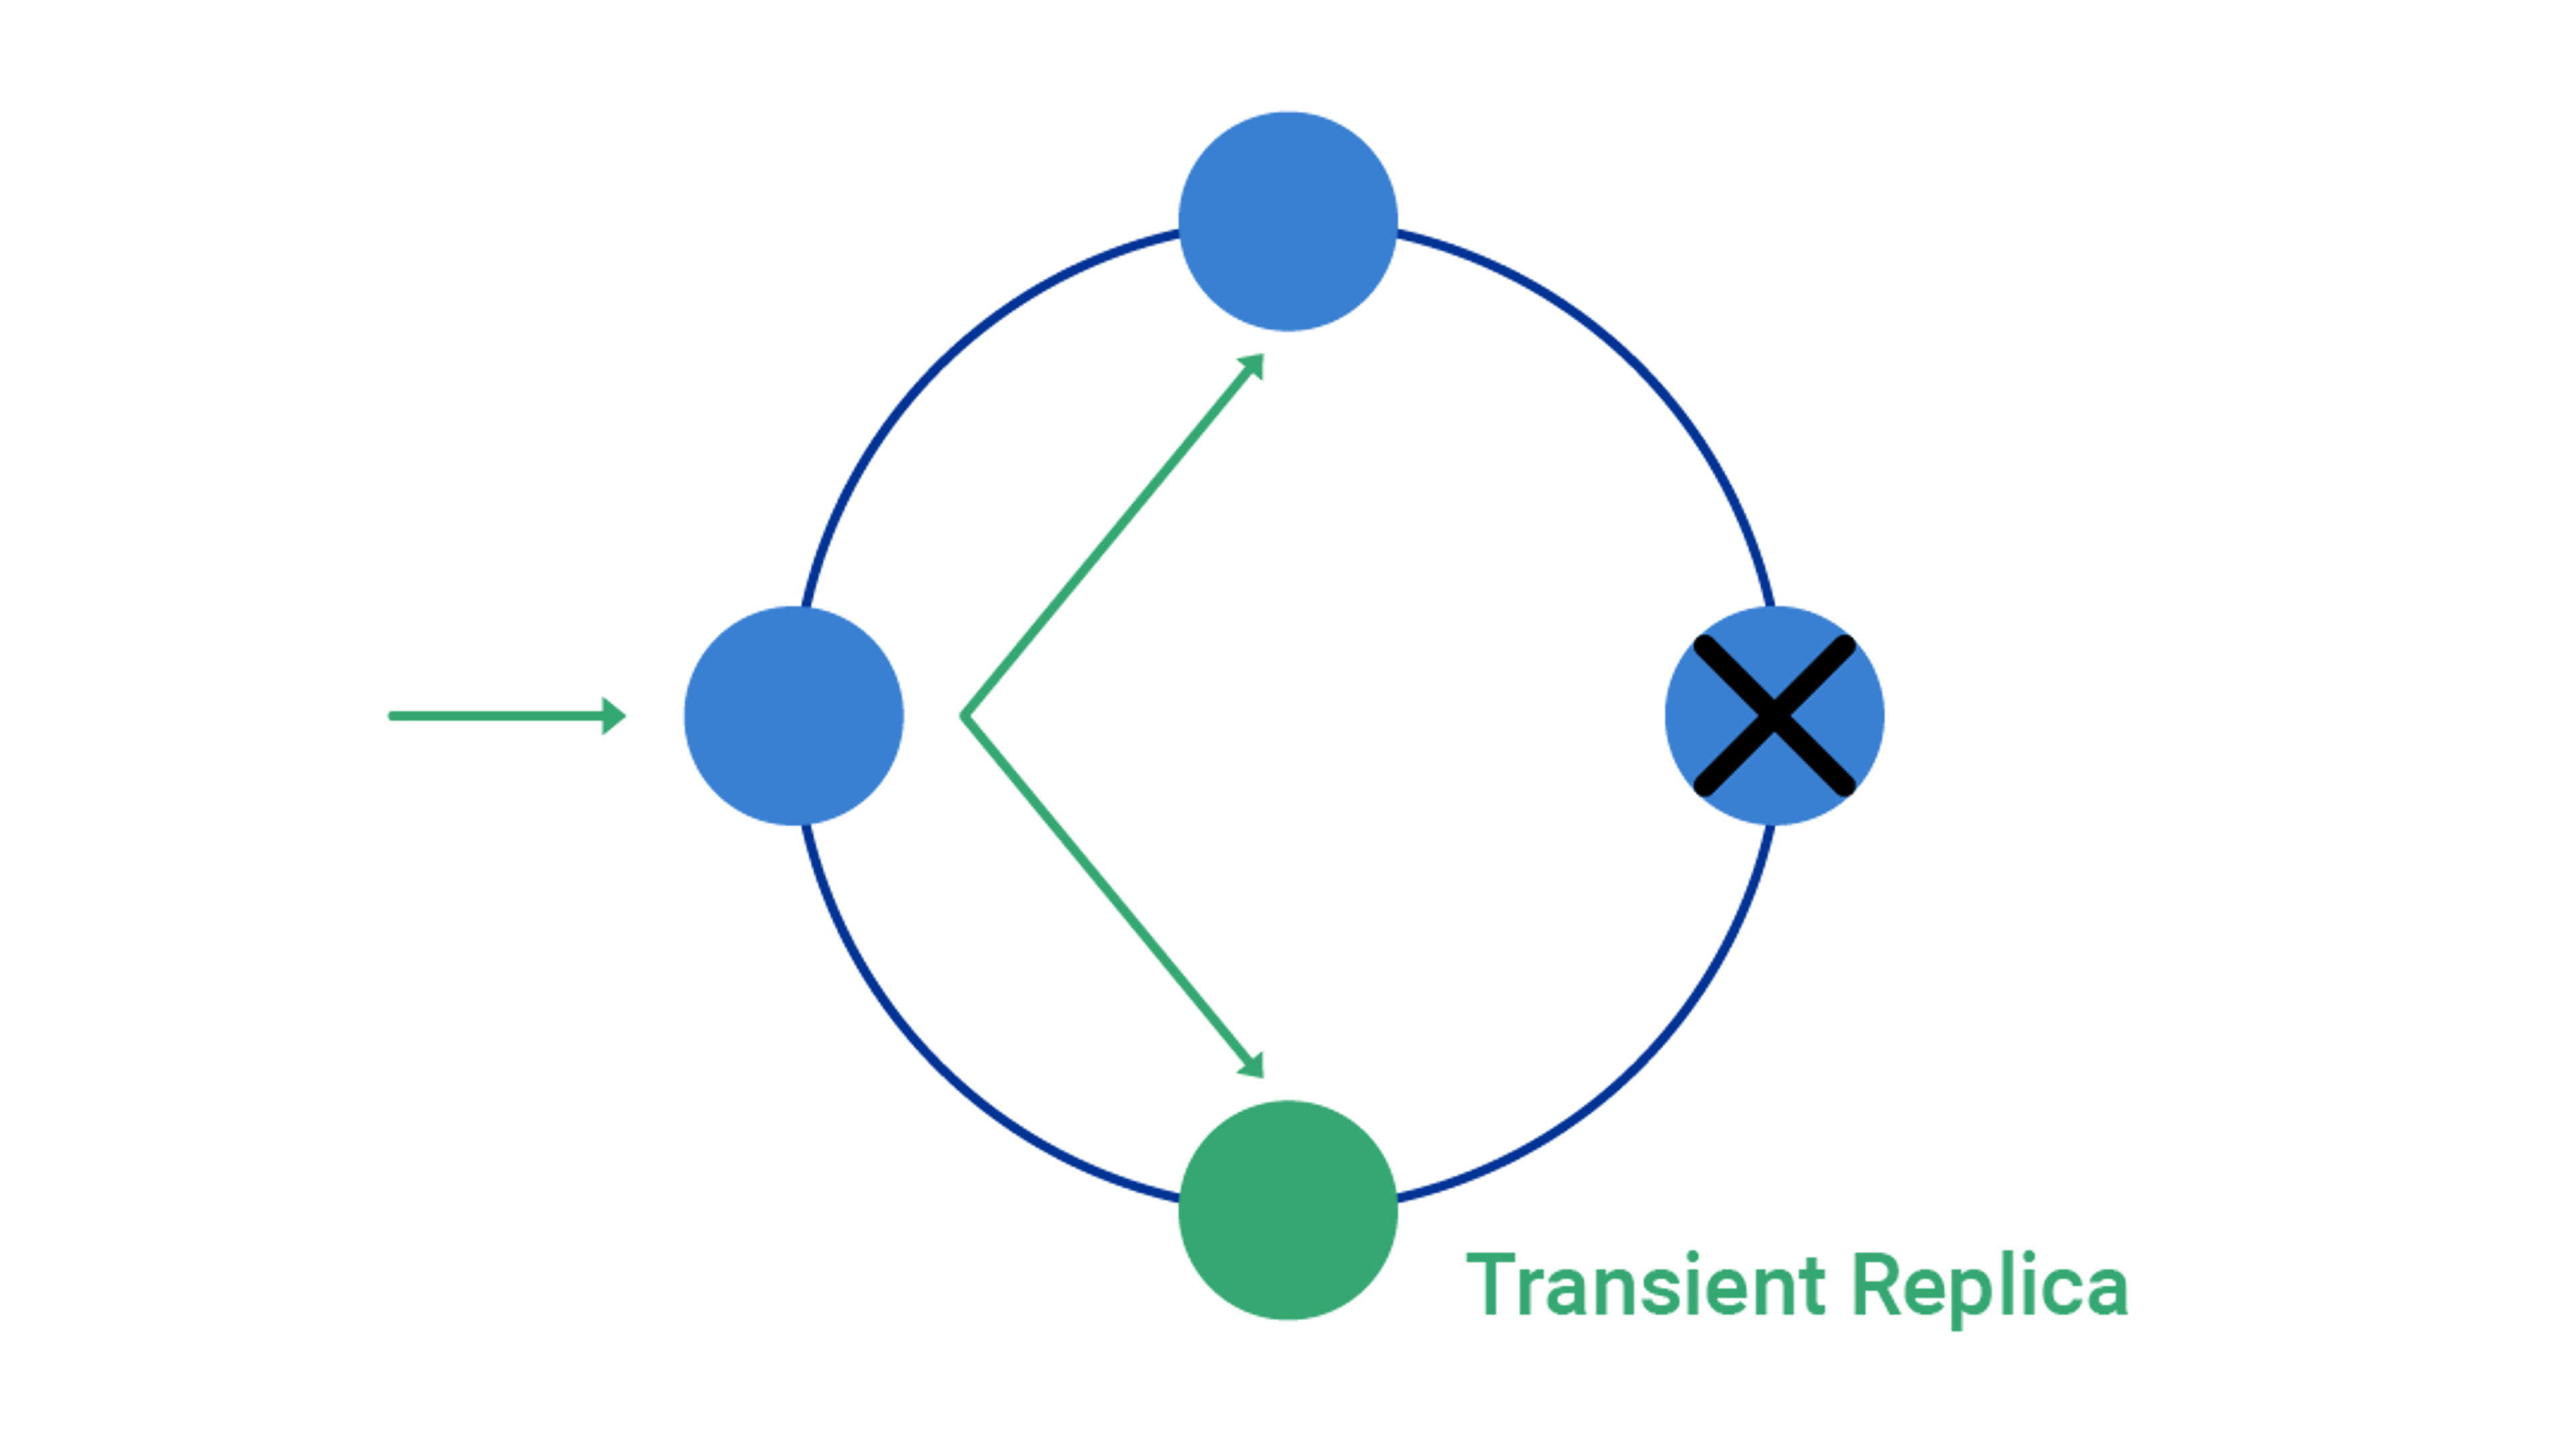 Introducing Transient Replication